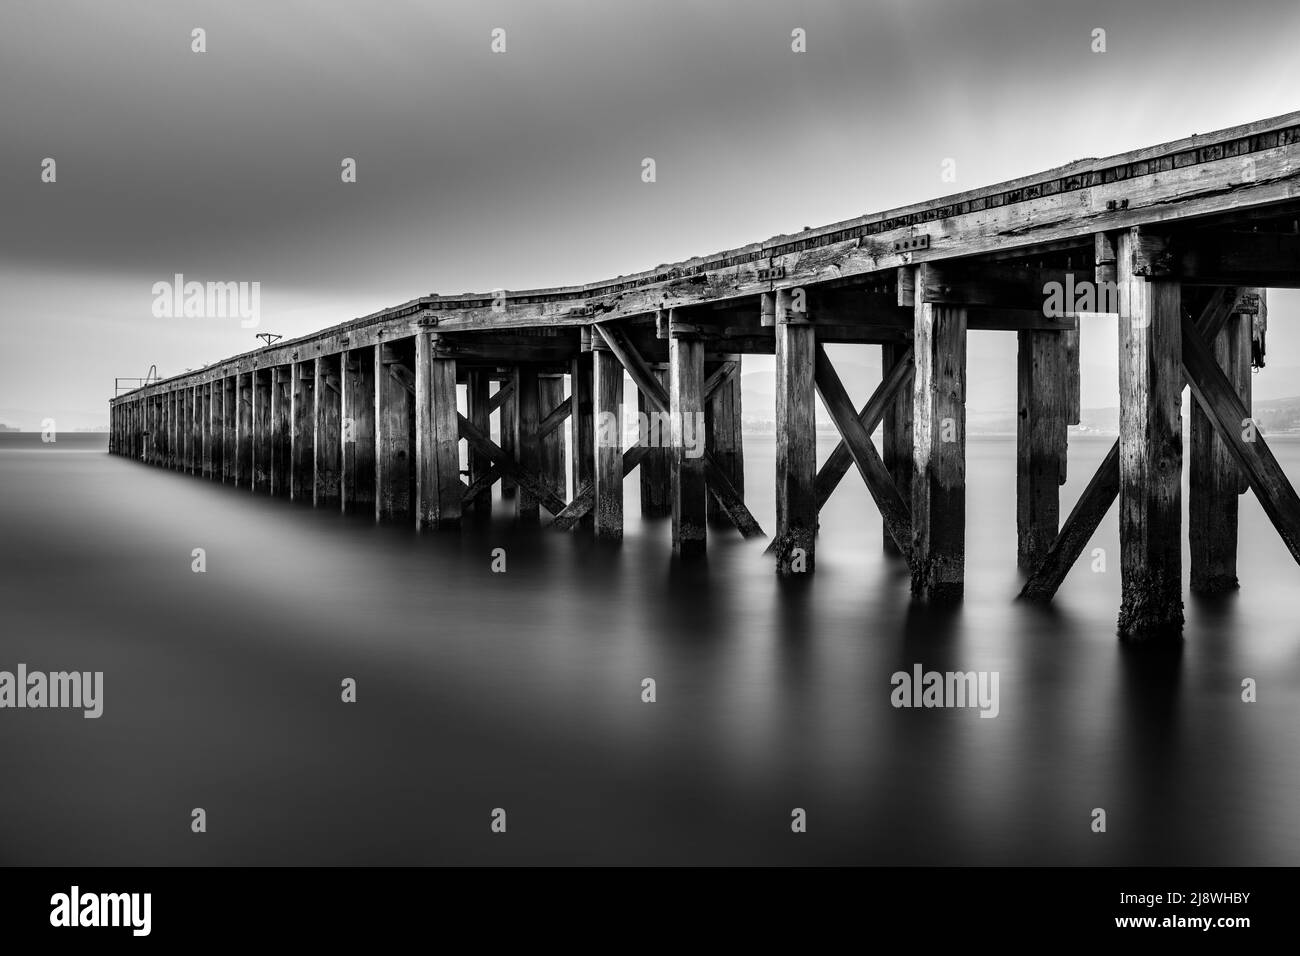 Long Exposure Monochrome Image of Lamonts Pier in Newark, Port Glasgow, Scotland which is historic and rotting. Stock Photo